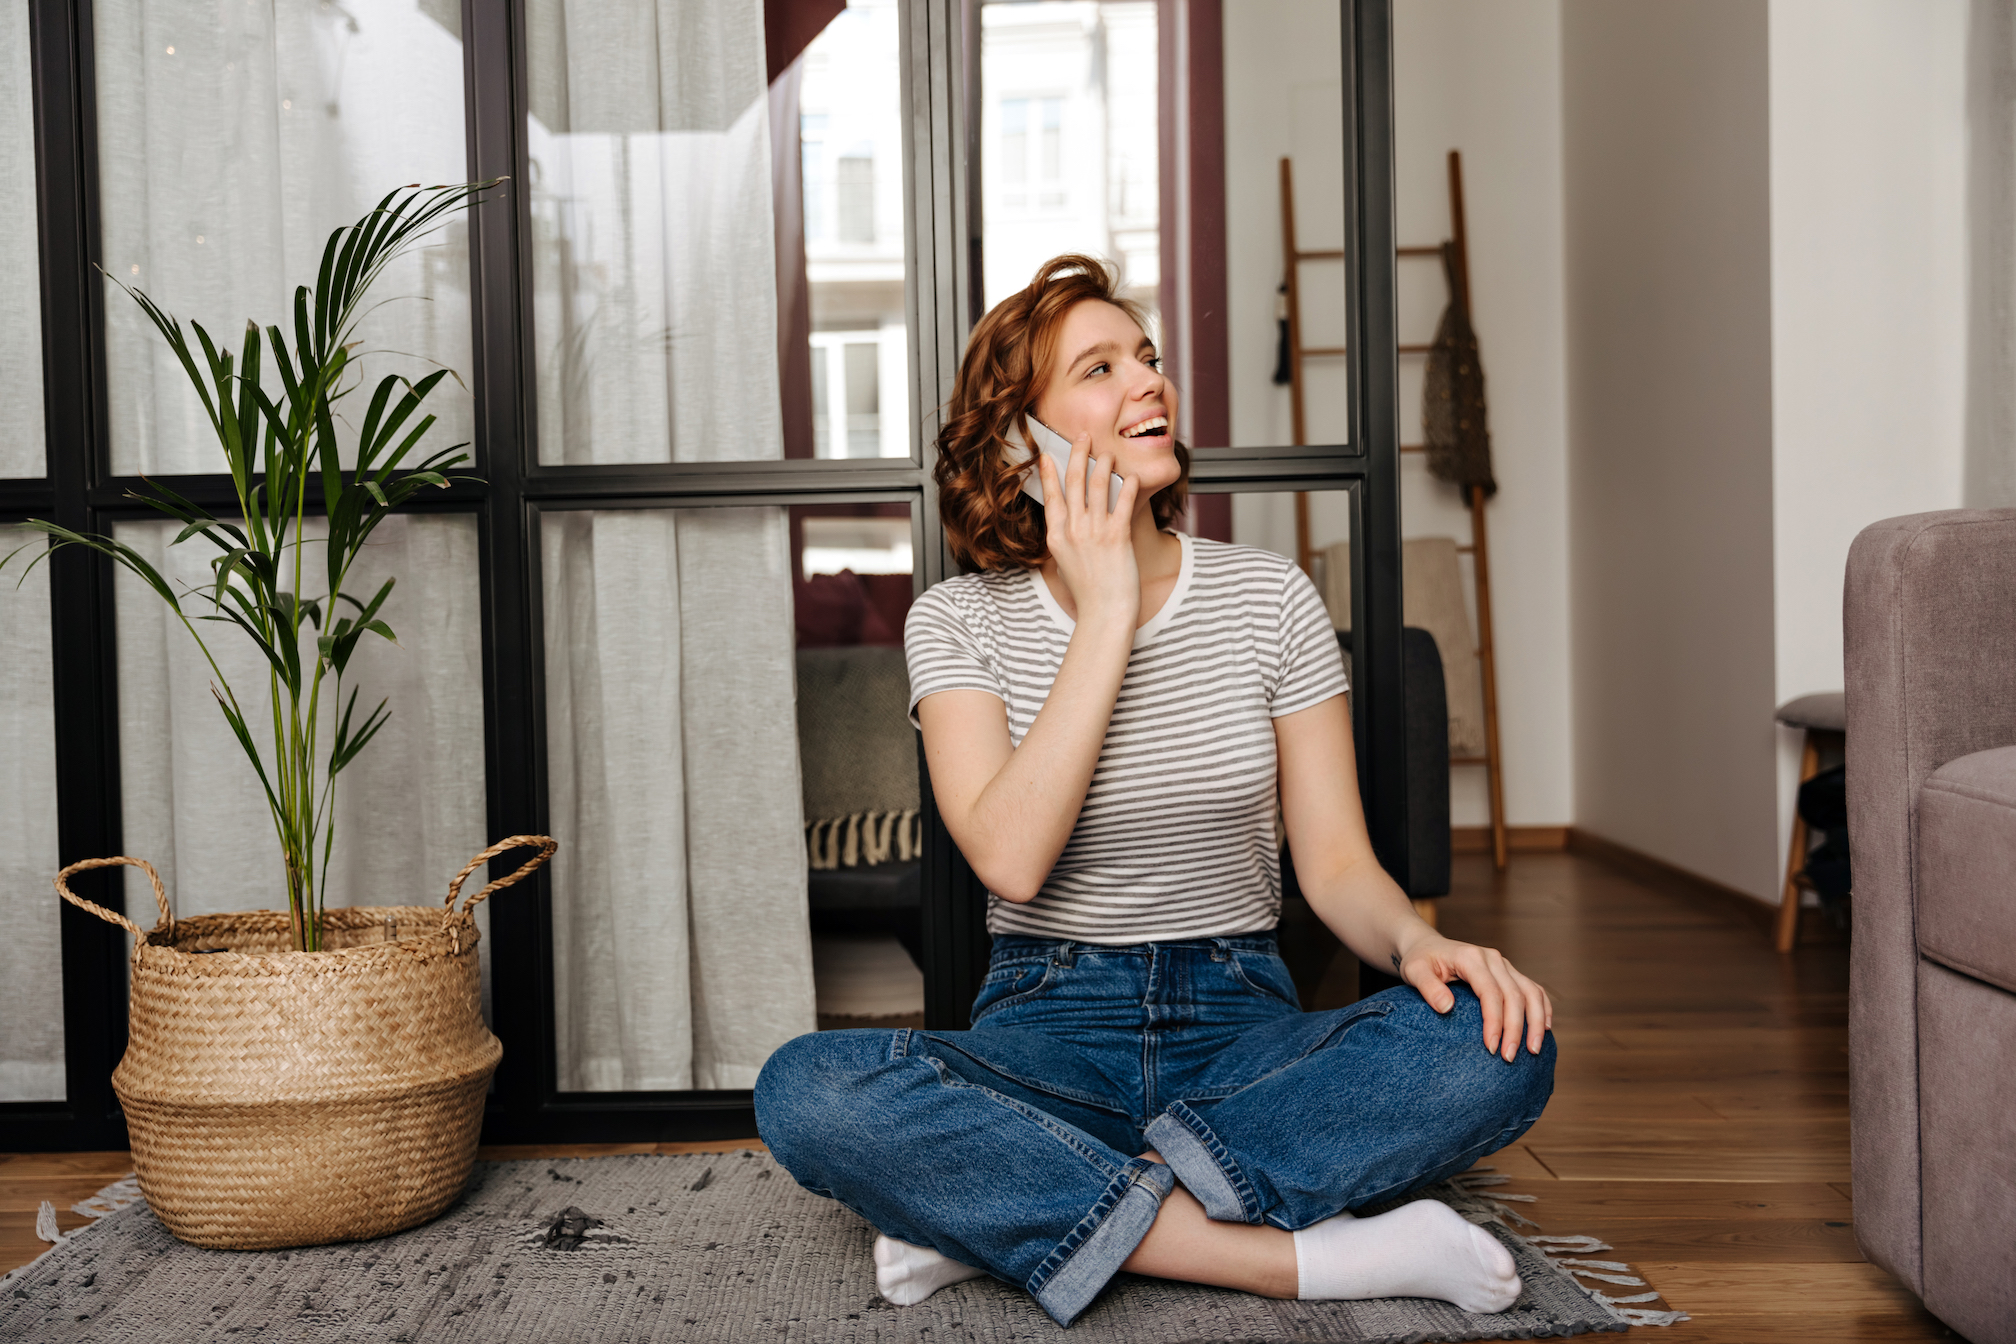 Lovely woman in jeans is sitting on floor in living room and talking on phone